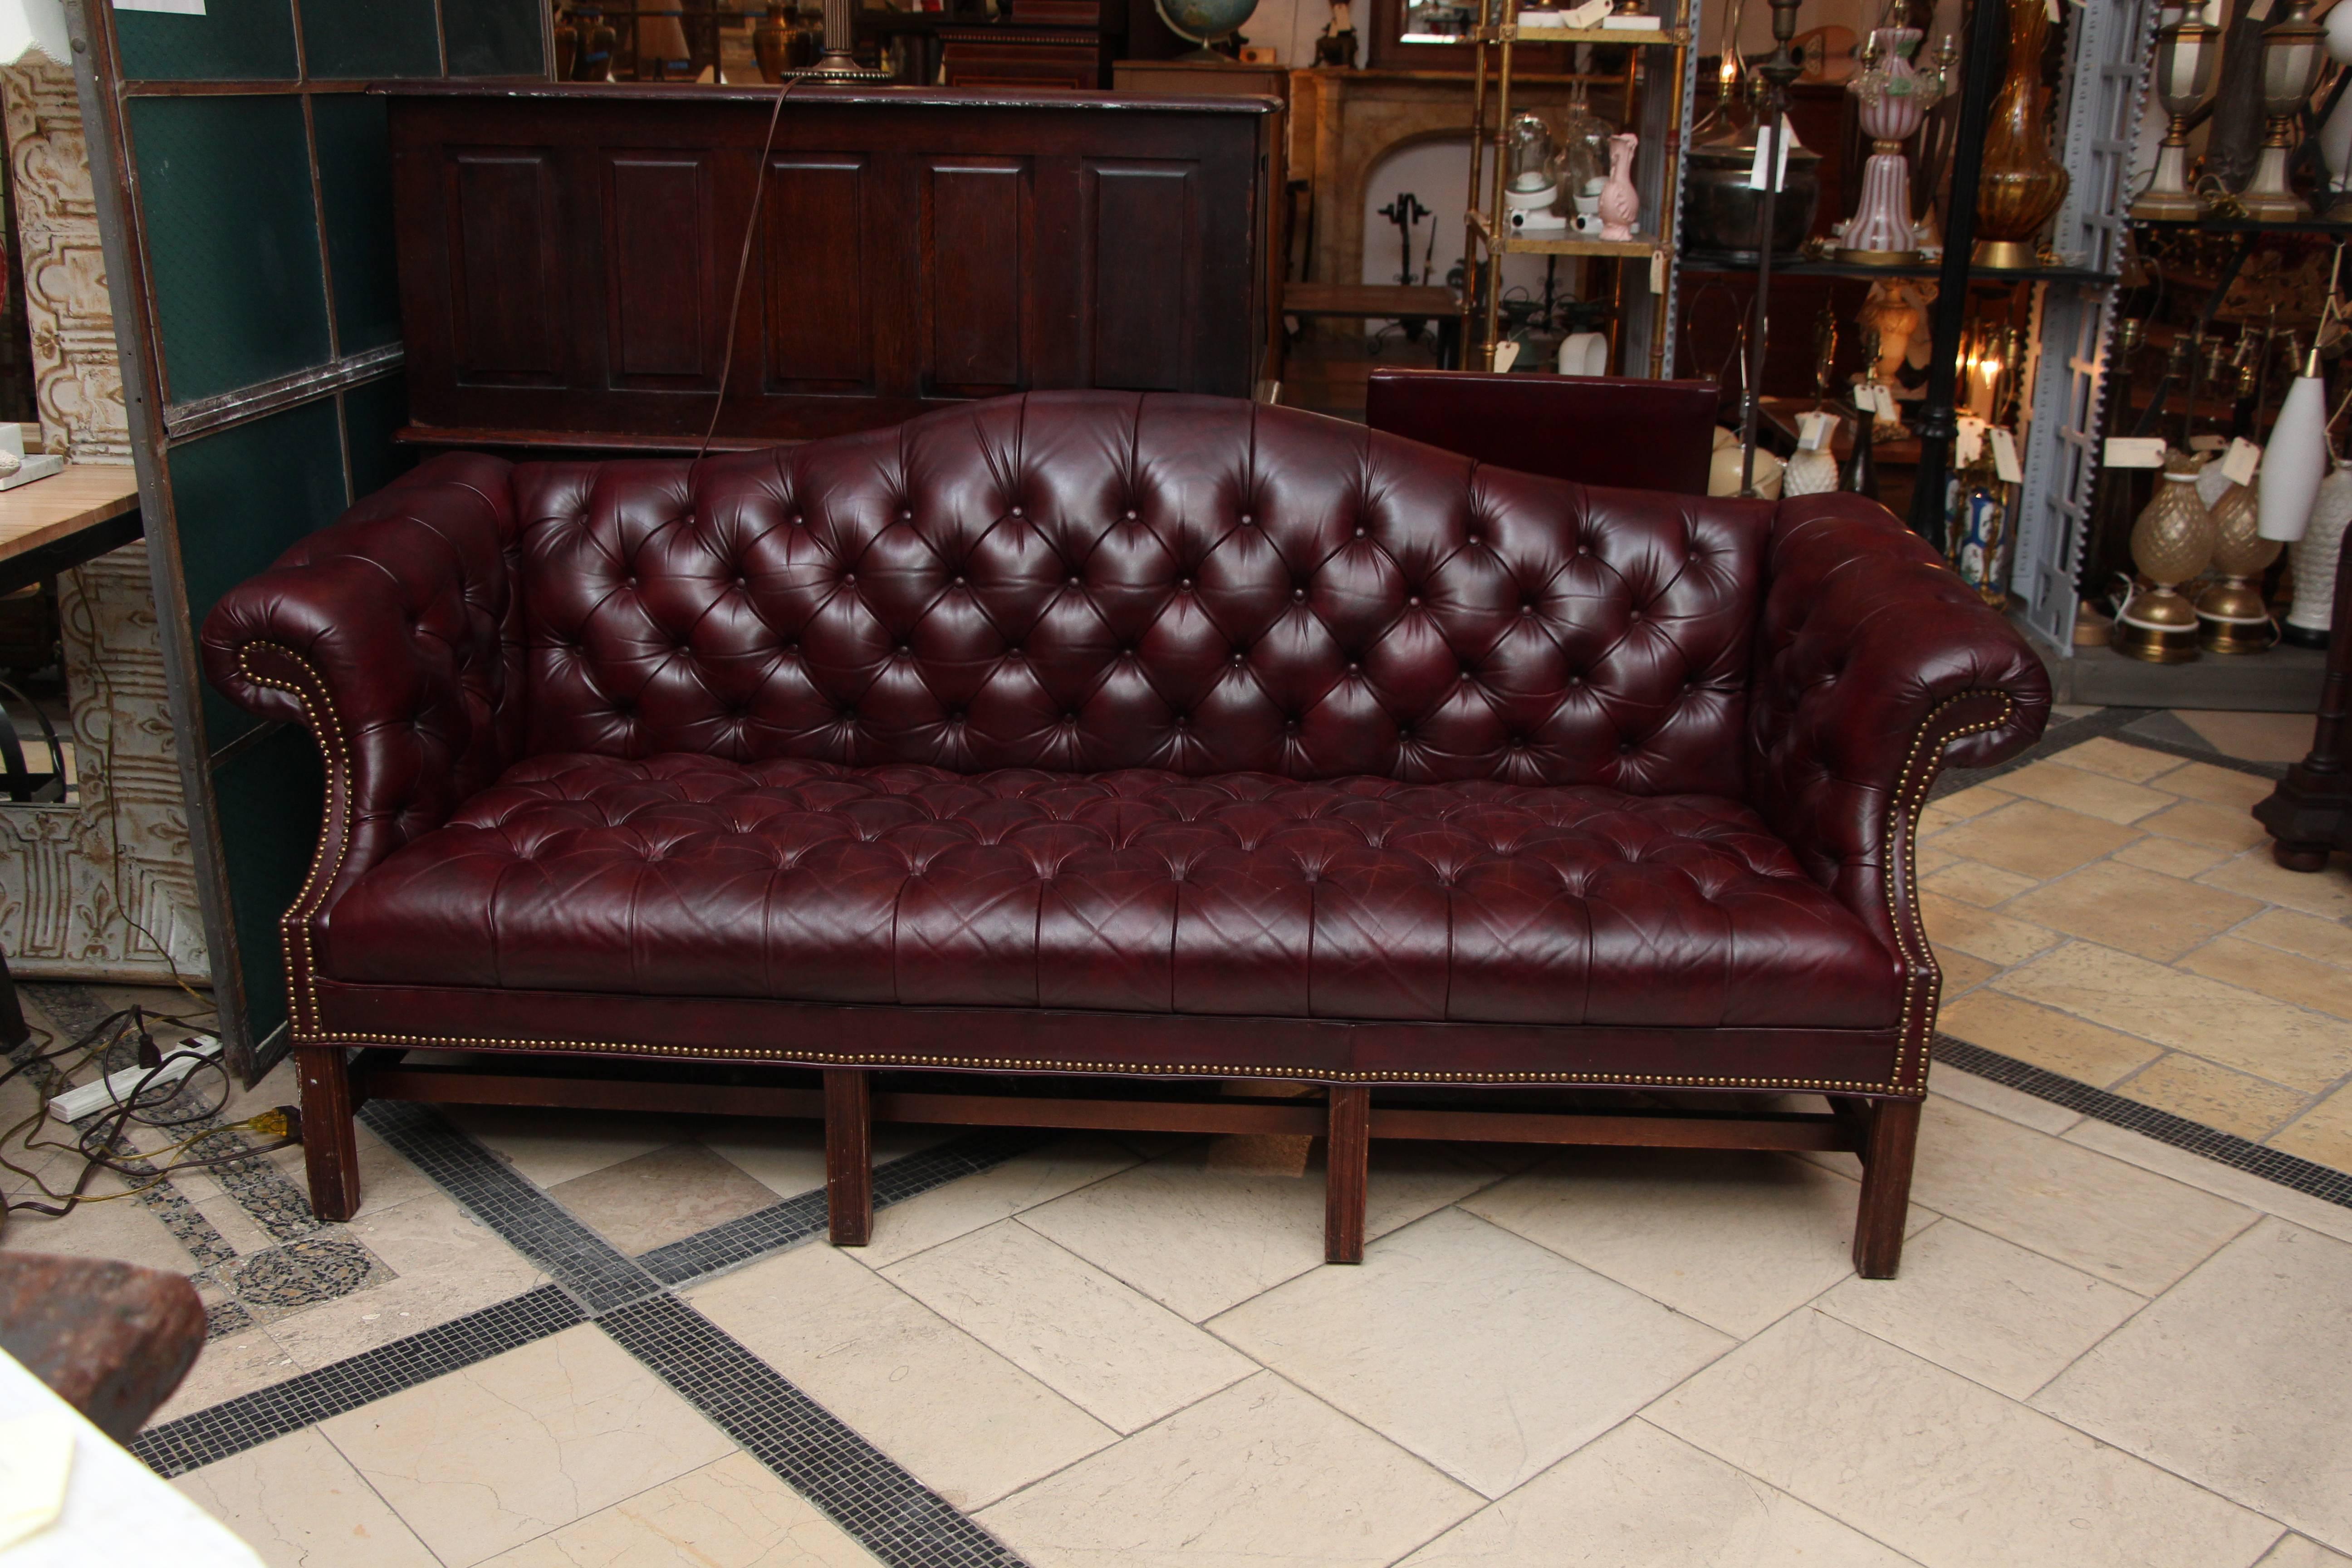 1980s tufted burgundy Chesterfield leather sofa and chair set with hickory wood manufactured by Hickory Leather Company. This set can be viewed at our 5 East 16th St, Union Square location in Manhattan.